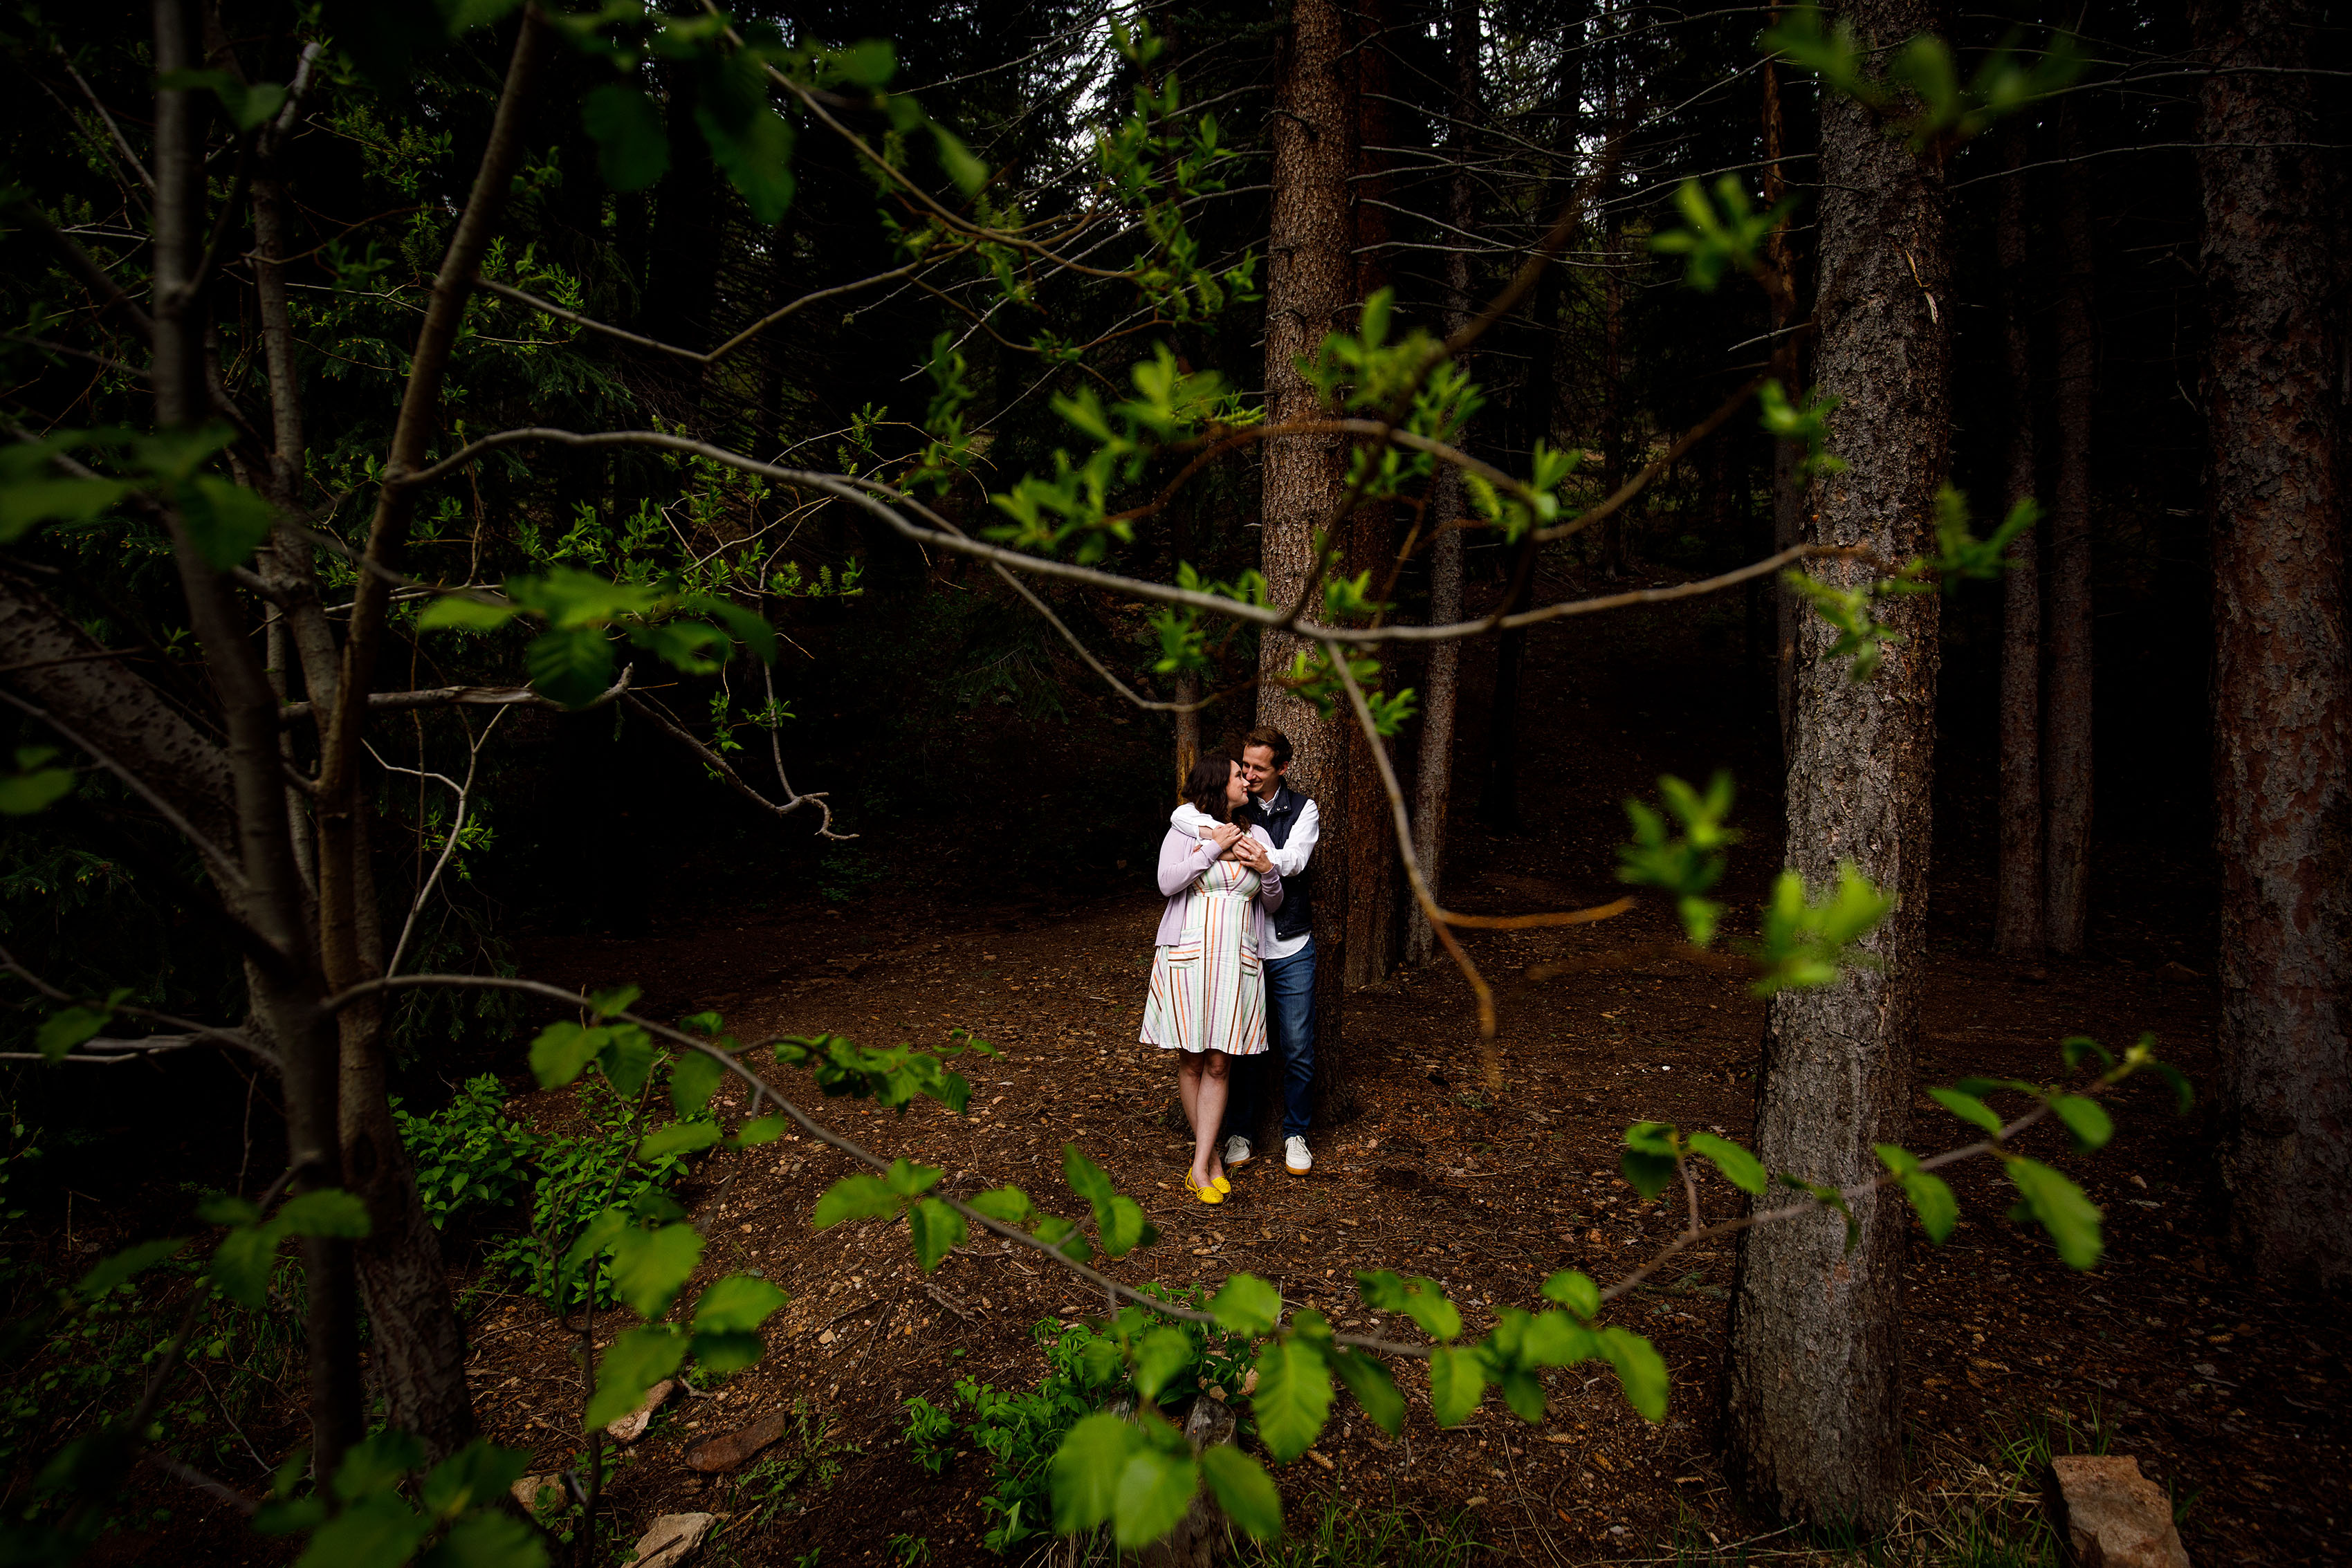 Meaghan and Matthew share a moment together in the pine trees near Maxwell Falls trail in Evergreen